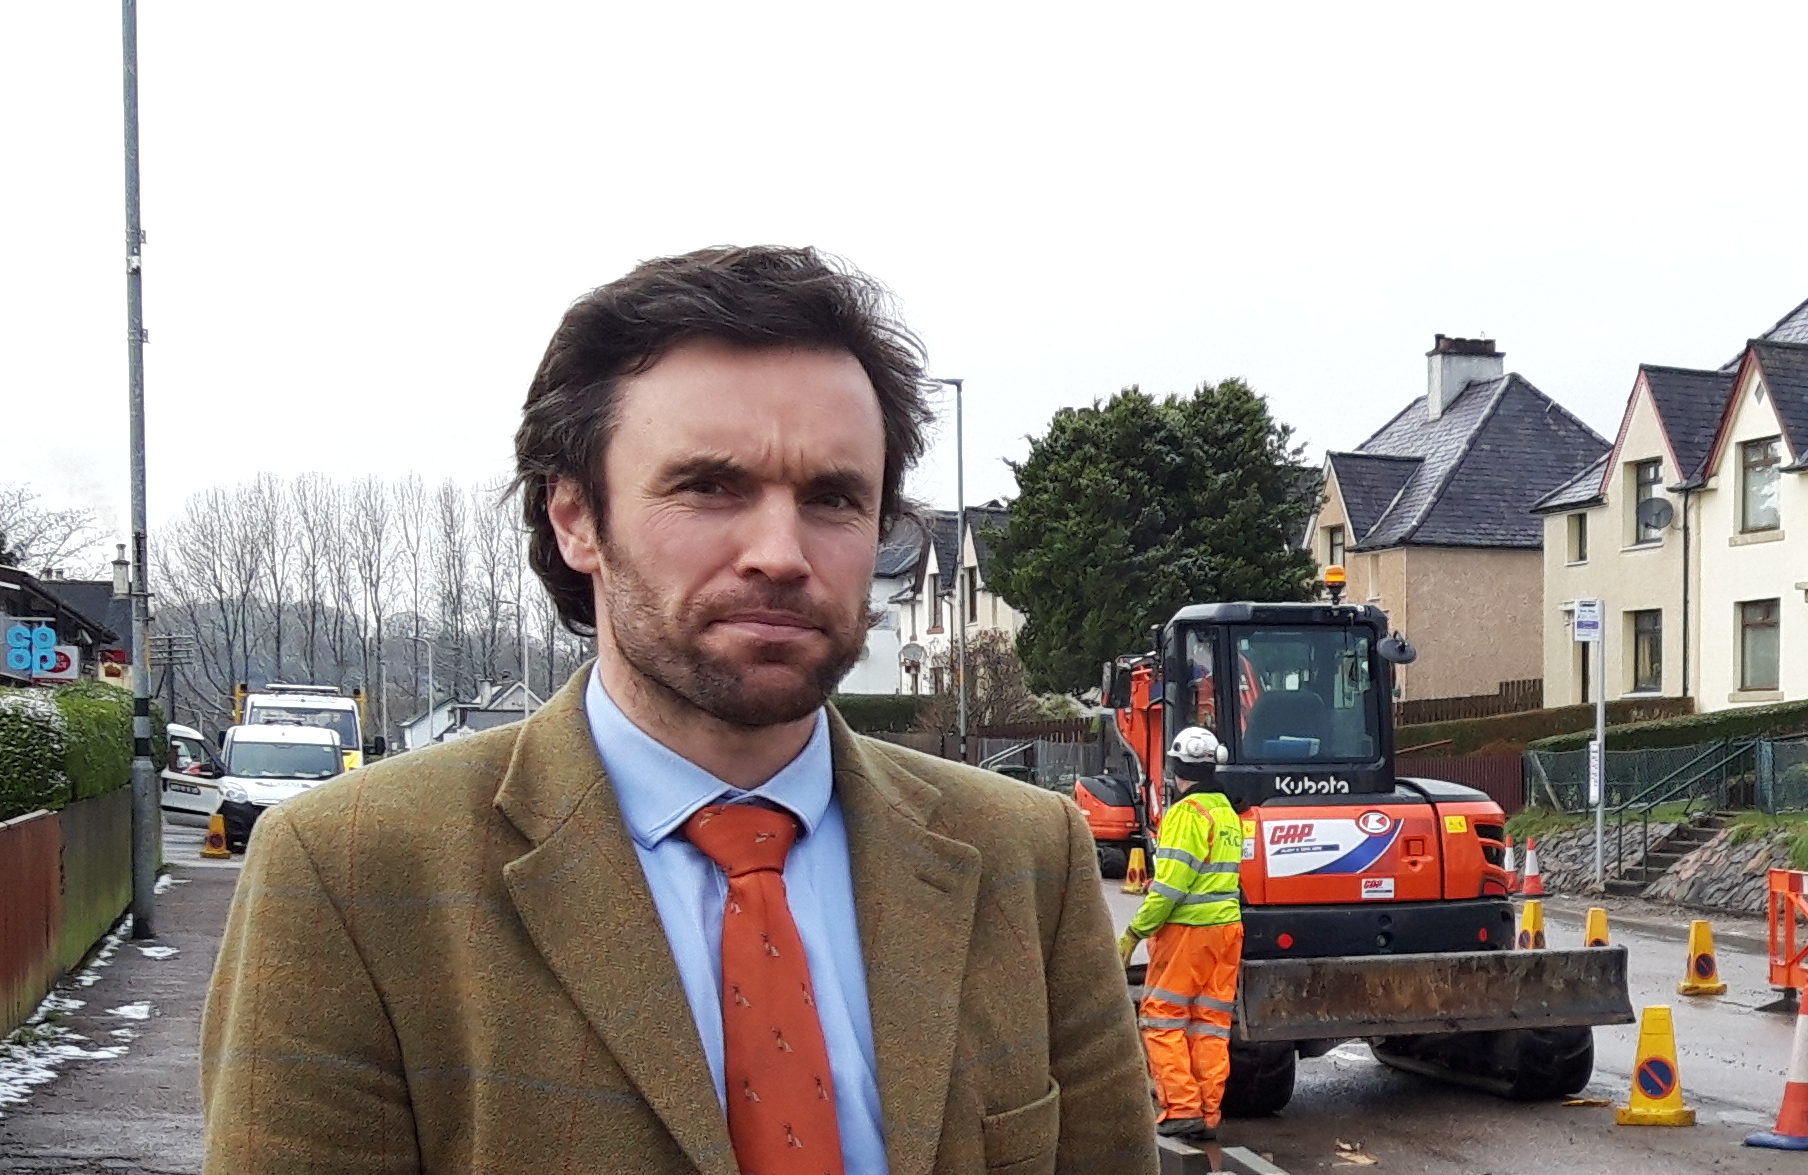 Councillor Ben Thomson praises the hard work and determination of the community in improving the safety of pedestrians in the village of Corpach.